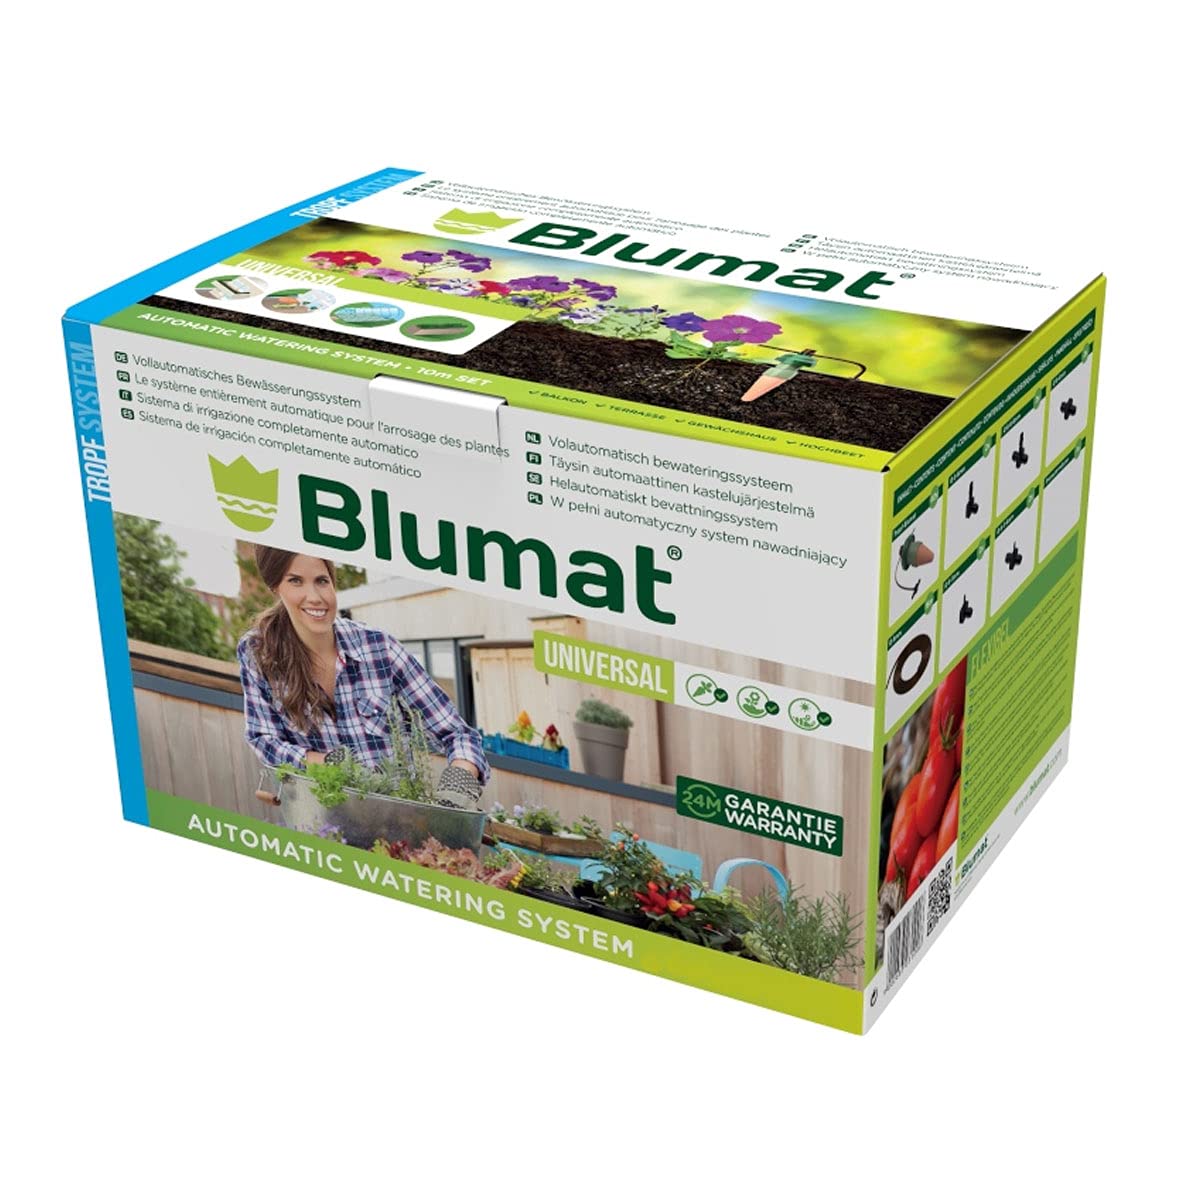 Blumat Watering Systems Automatic Irrigation for Up to 40 Plants| Drip Irrigation Kit | No Electricity, No Batteries Required | Garden, Patio, Hanging Baskets, Raised Bed, Greenhouse